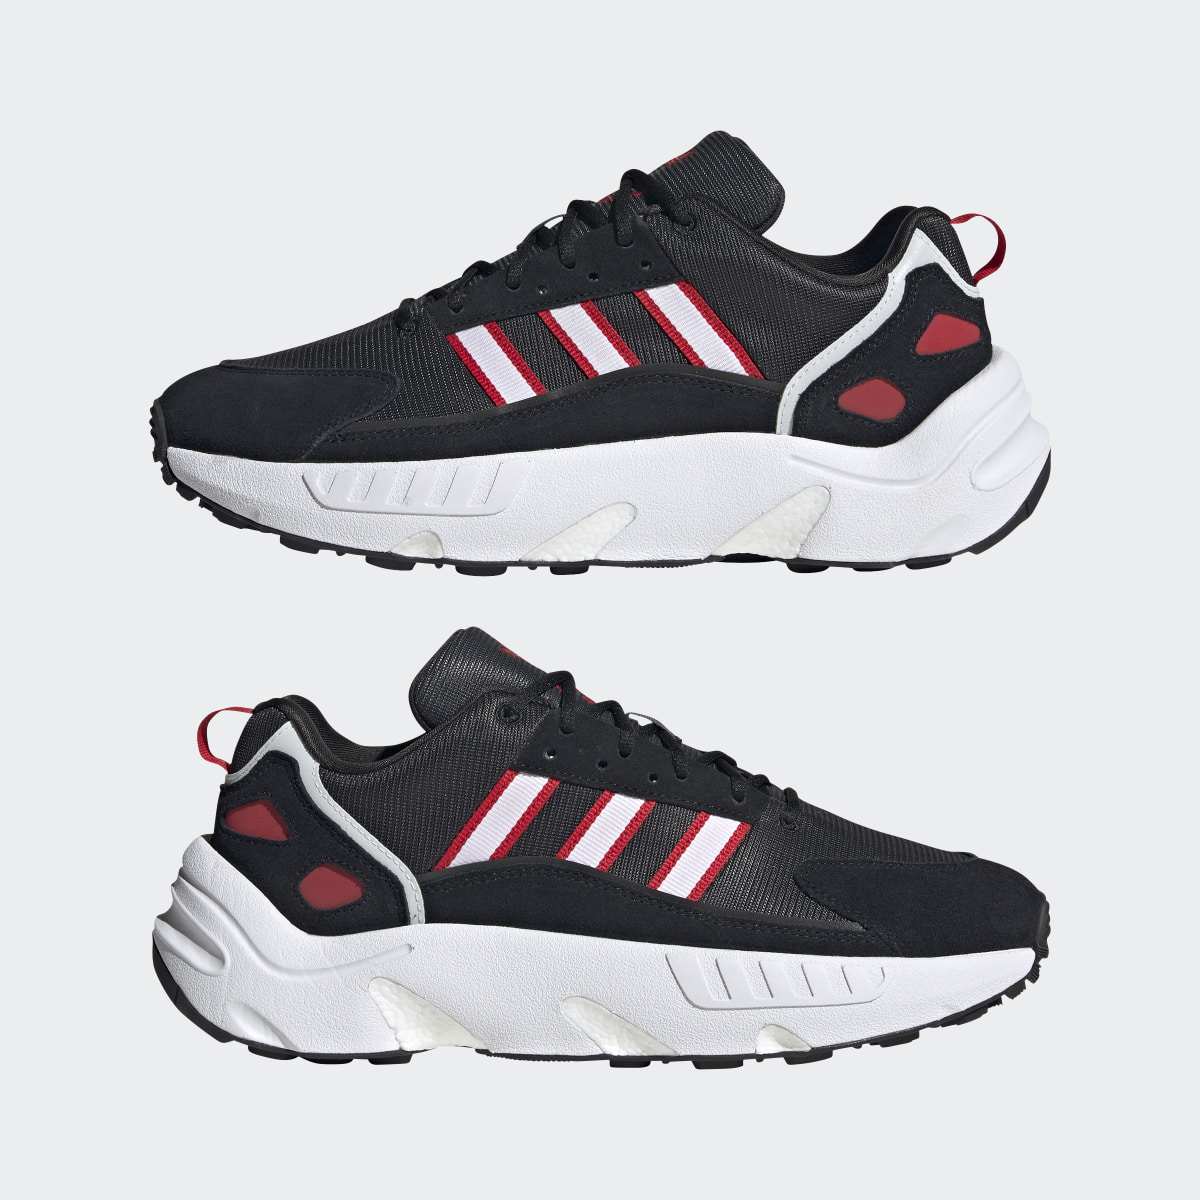 Adidas ZX 22 BOOST Shoes. 8